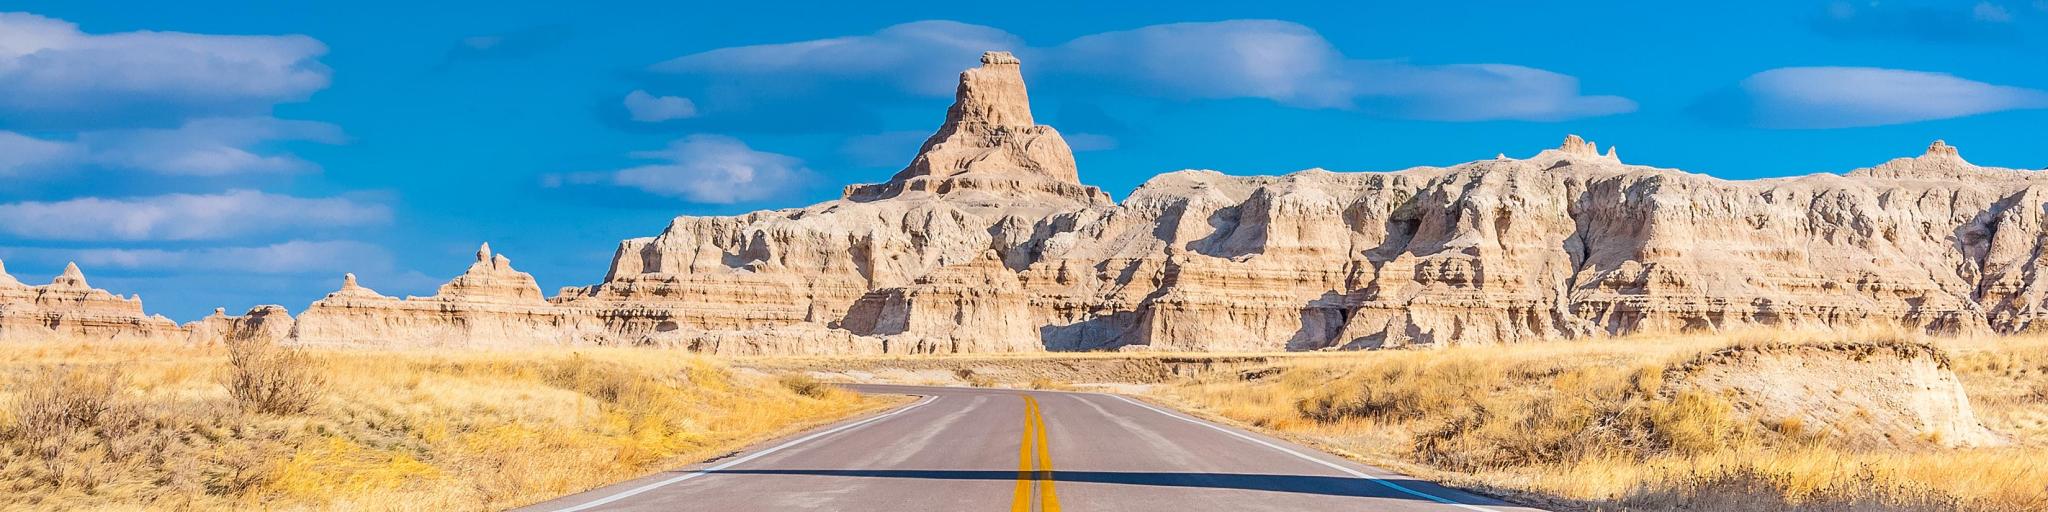 Road leading to Badlands National Park, sunny day with blue skies